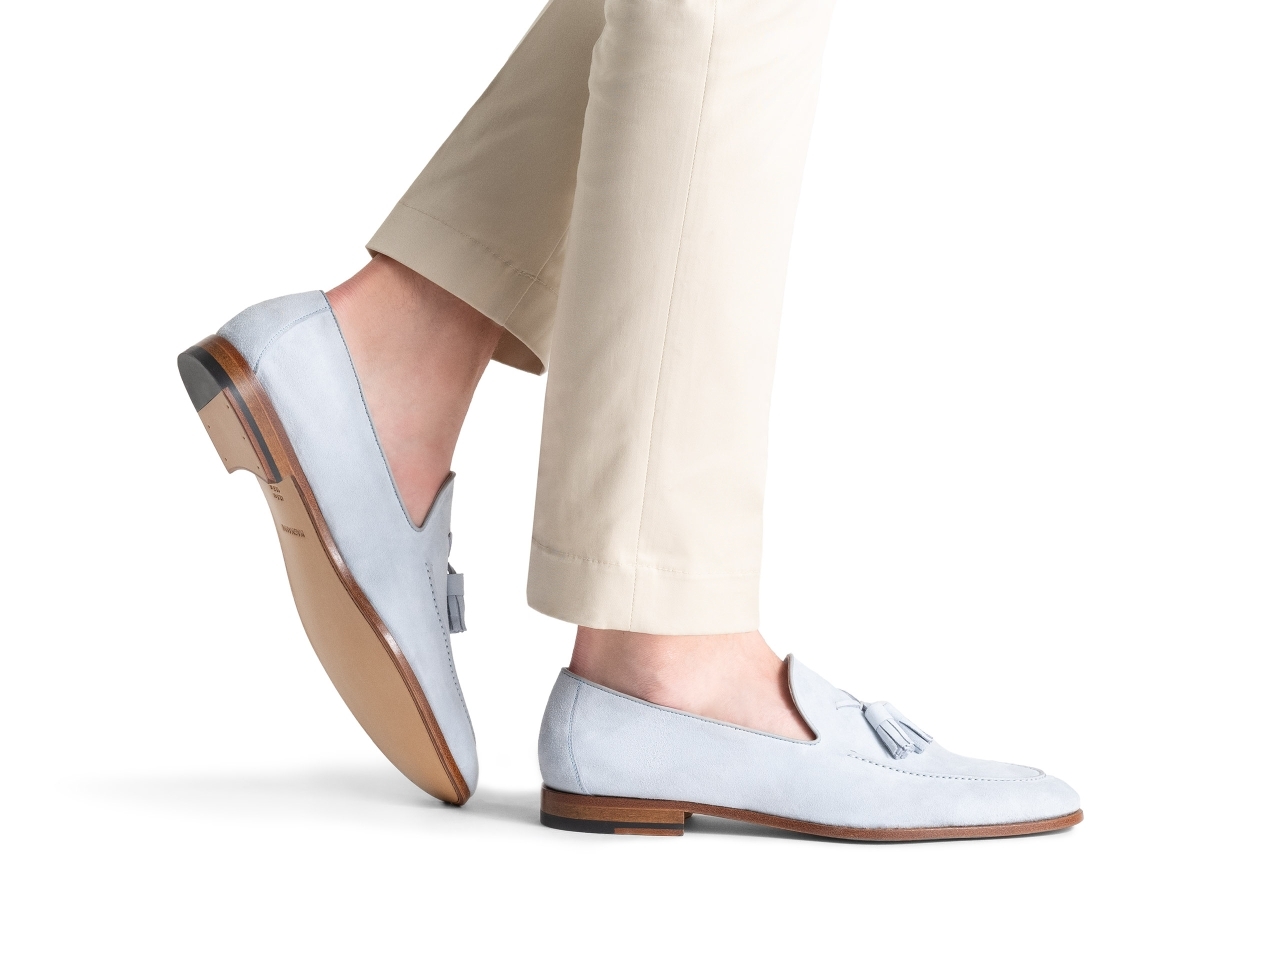 The Simmon Sky Blue Suede pairs well with light khaki pants